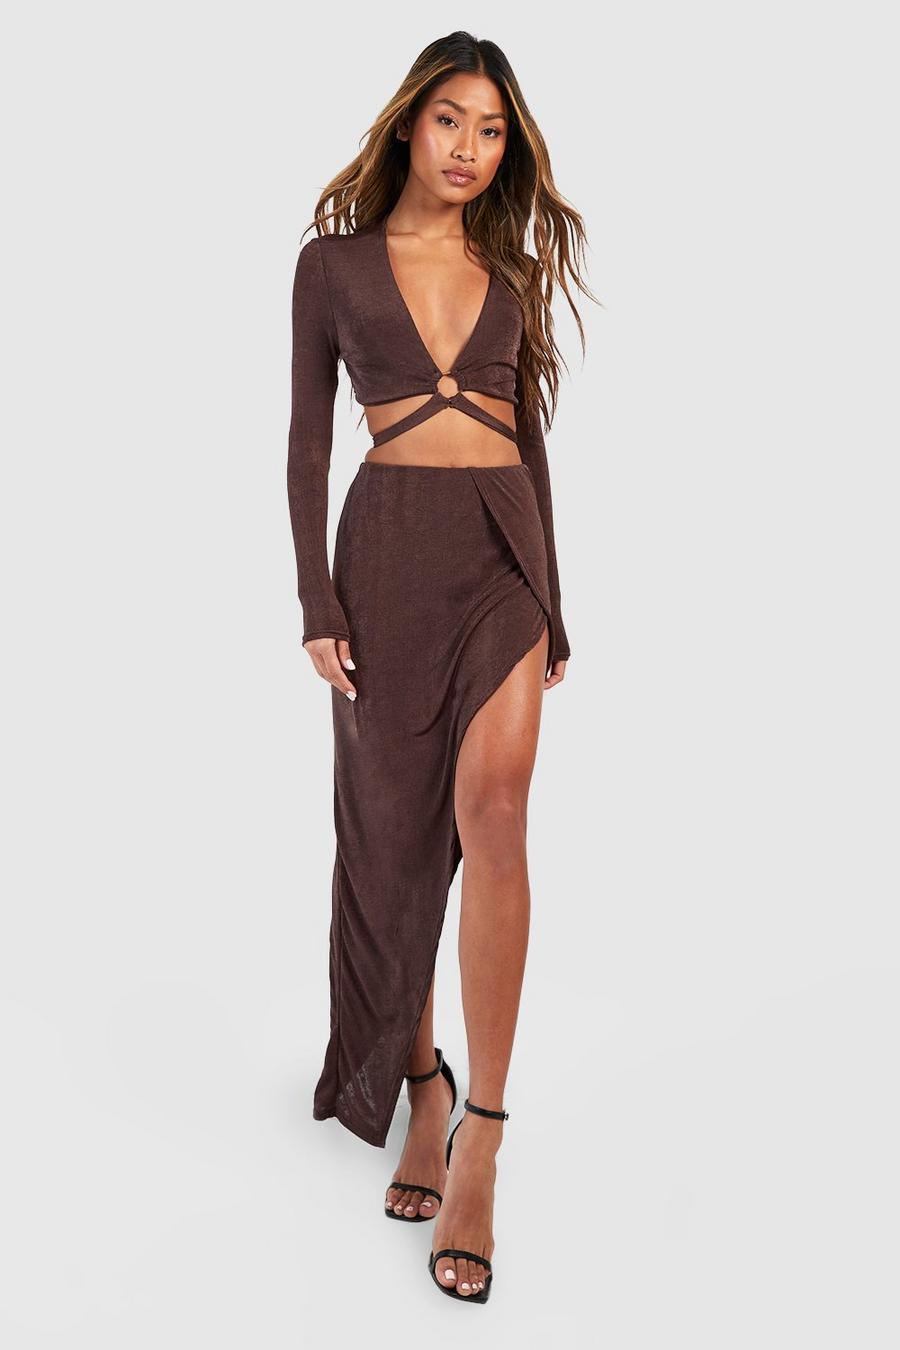 Chocolate Acetate Slinky O Ring Cut Out Top & Maxi Skirt